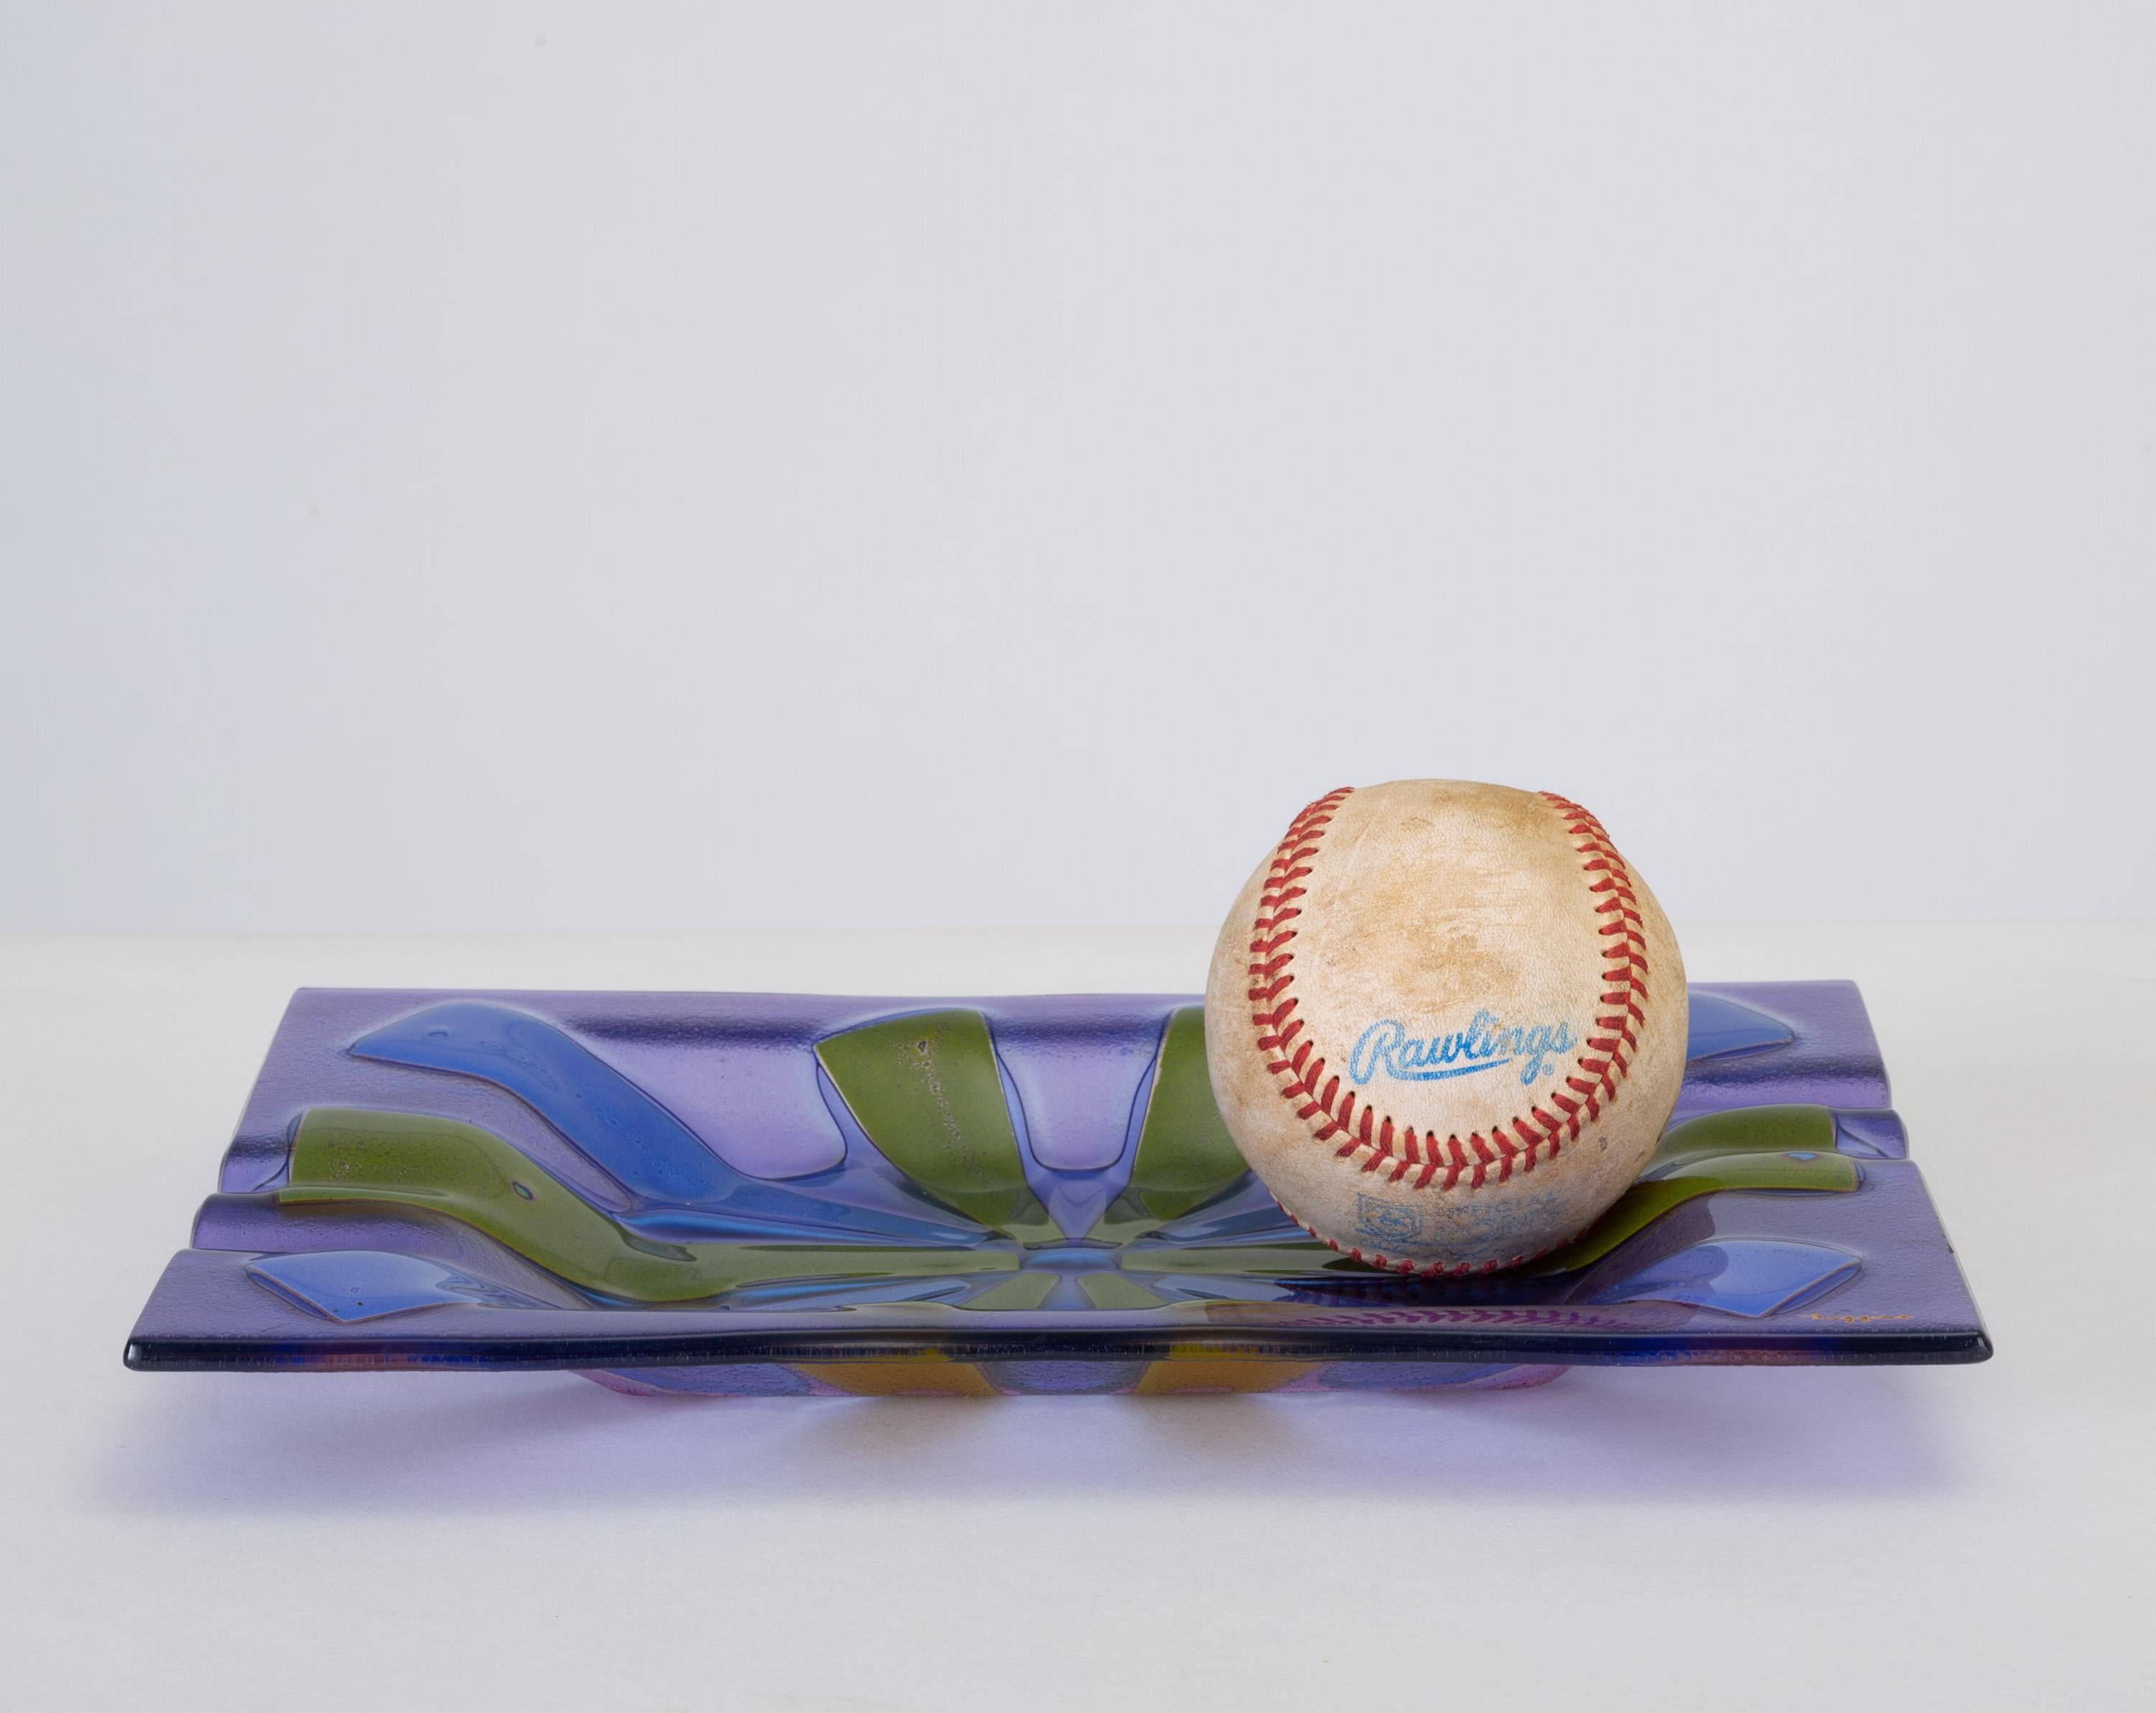 A fused-glass ashtray produced for Higgins by Dearborn glass in the mid-1950s to early 1960s. The pattern, called “Tortoiseshell” is created by sandwiching enameled glass panels of periwinkle blue and avocado green between tinted lavender glass